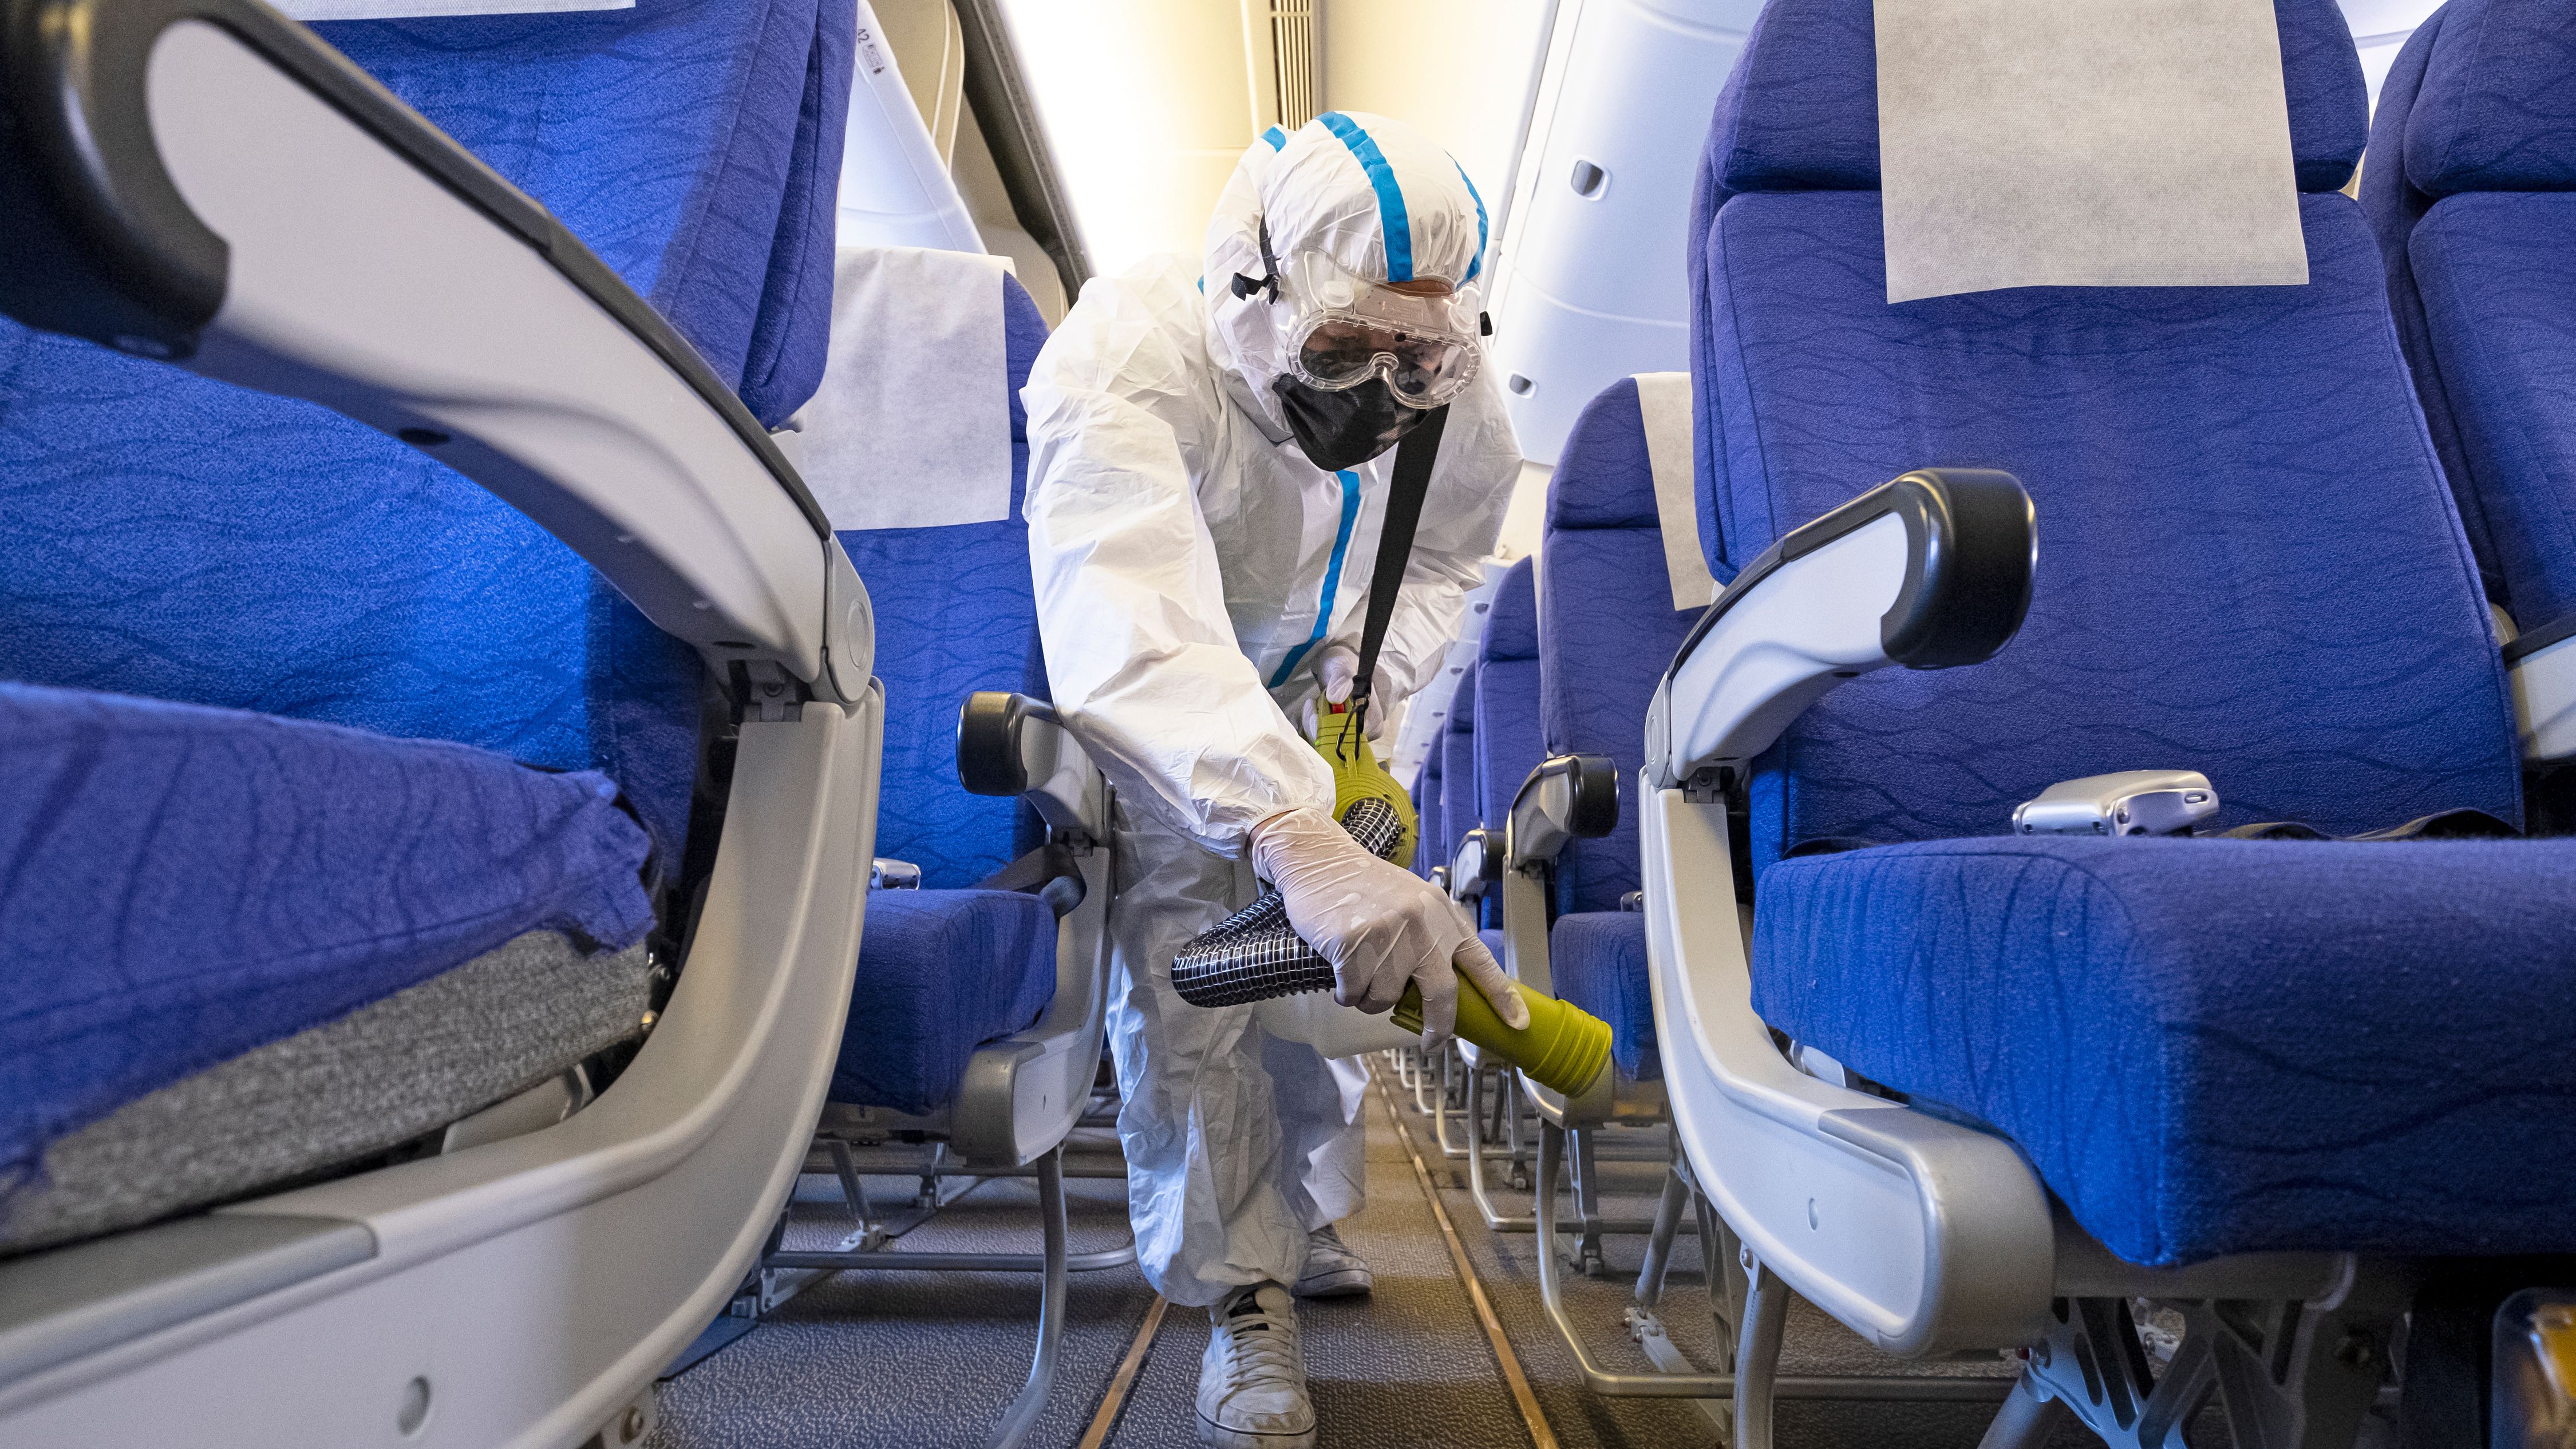 An individual in full PPE cleaning an aircraft cabin.